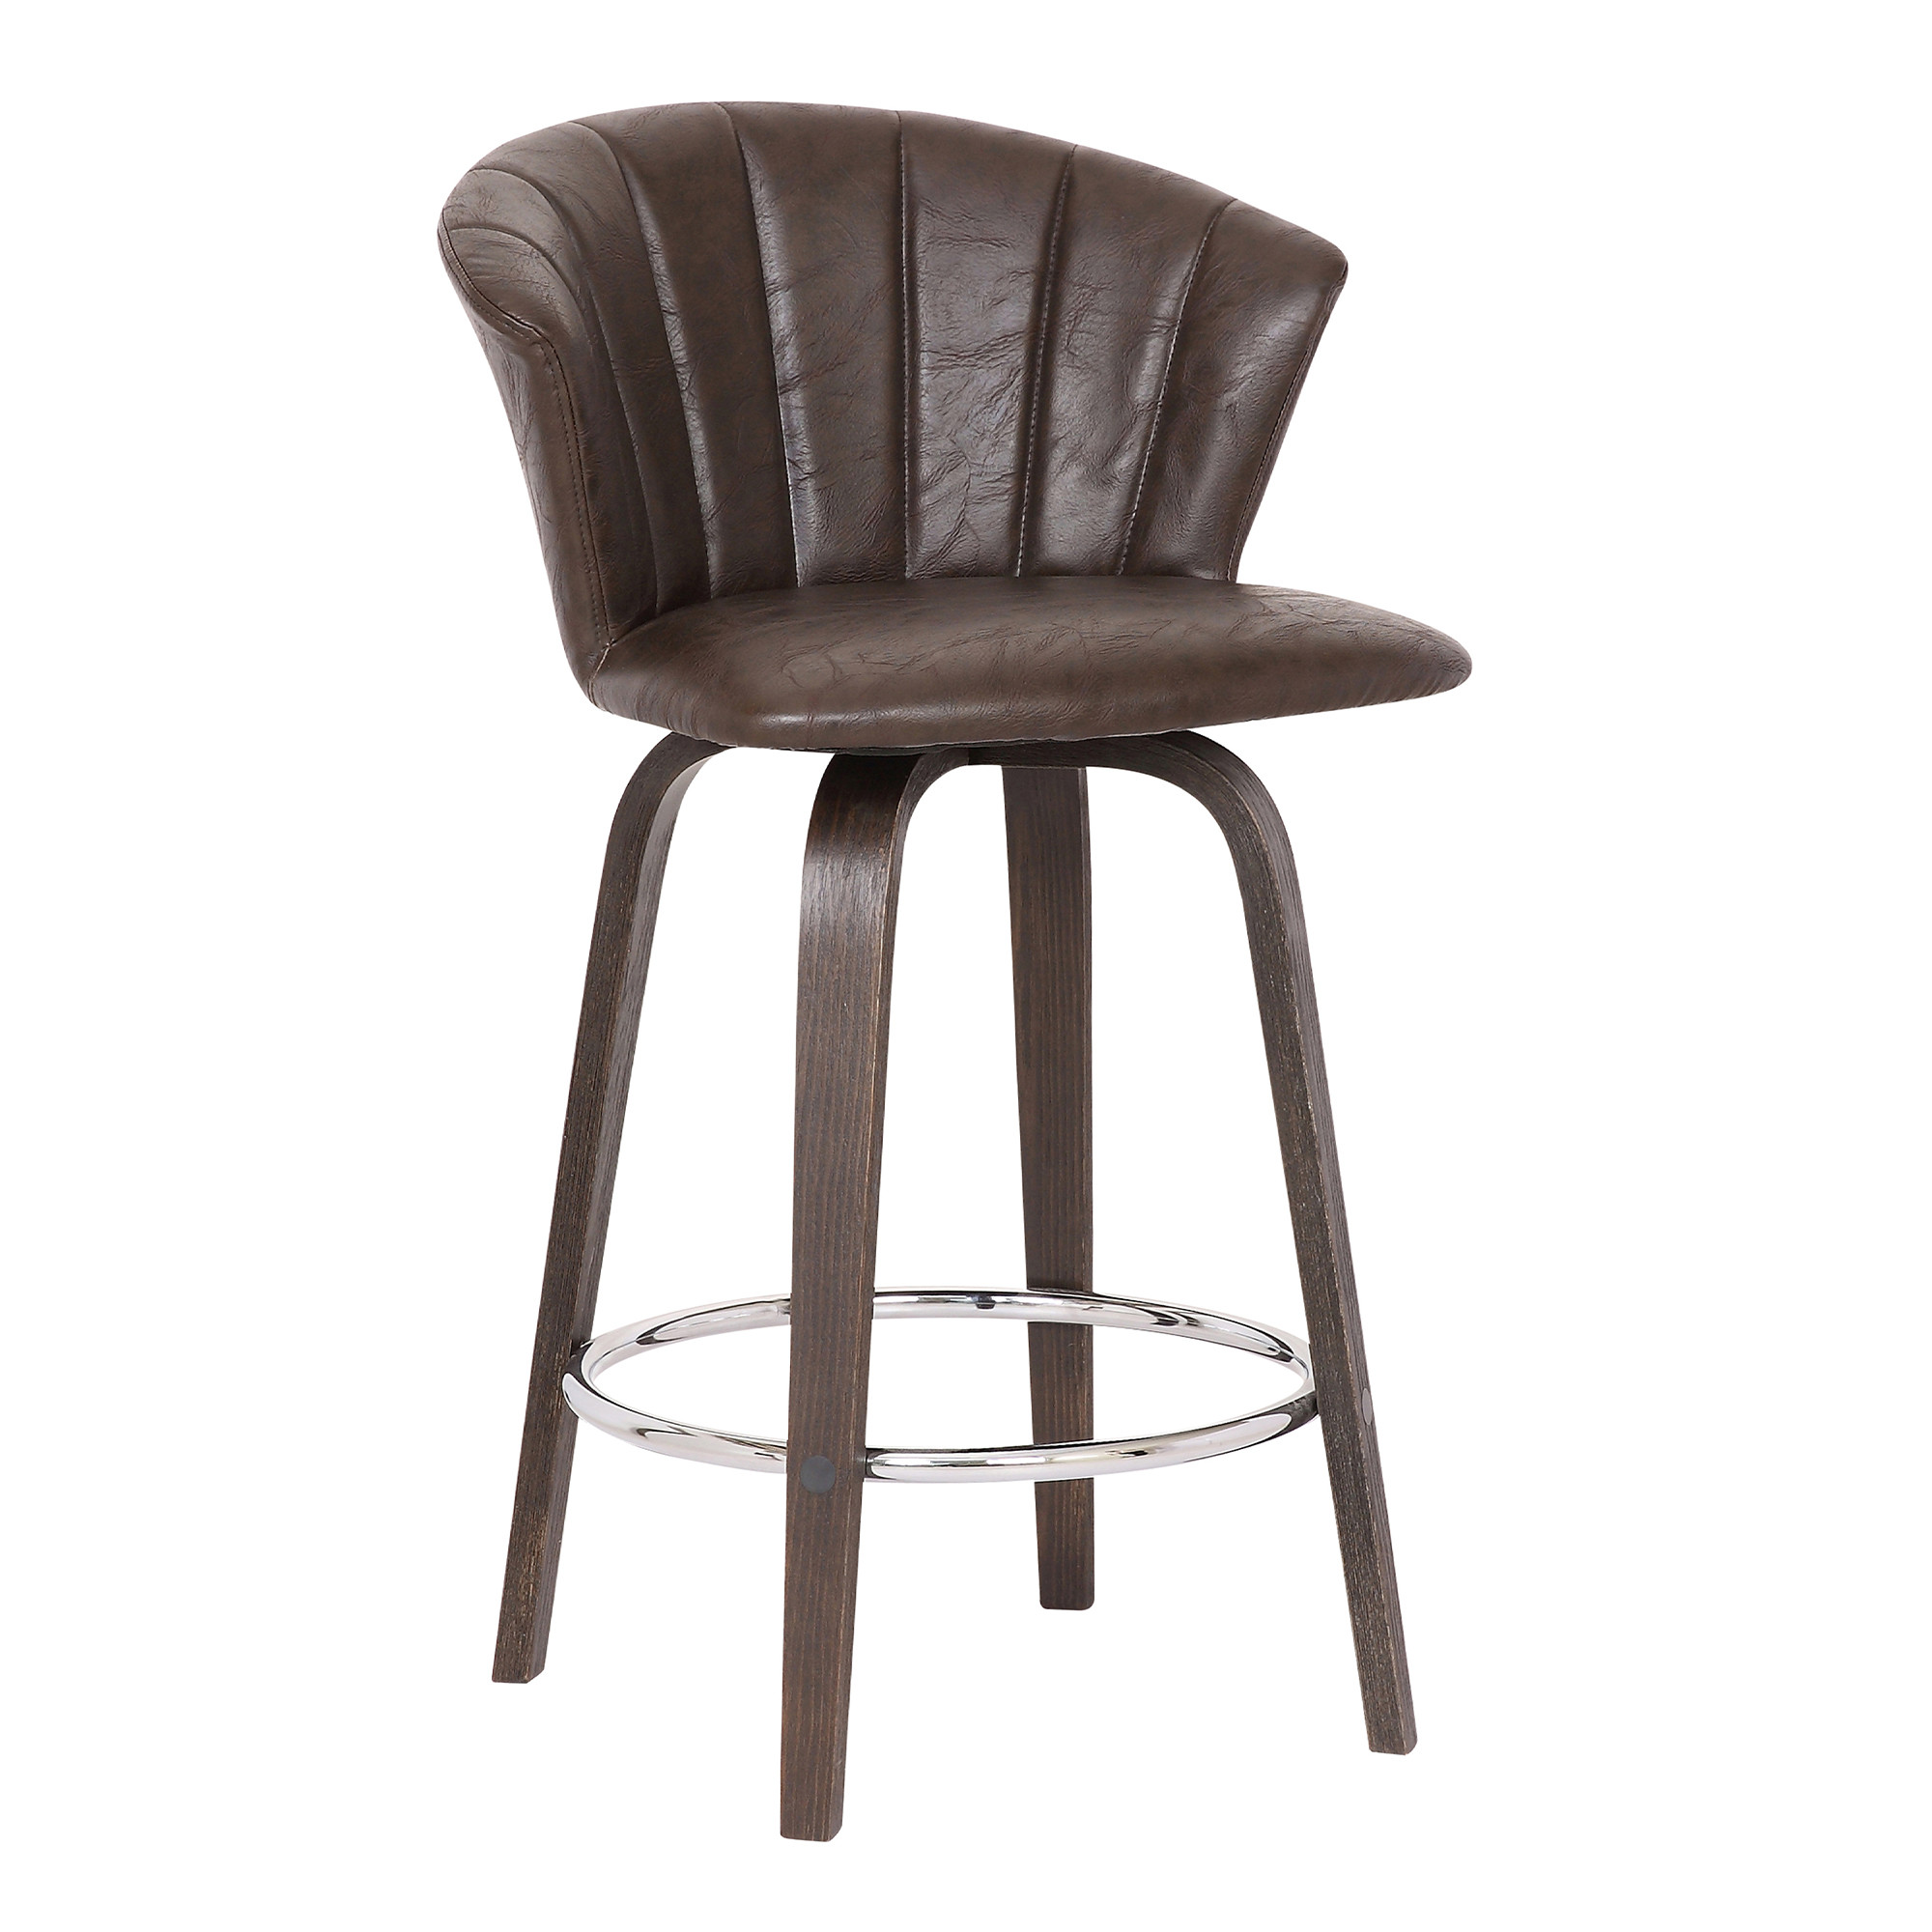 26" Vintage Look Brown Faux Leather Bar Stool